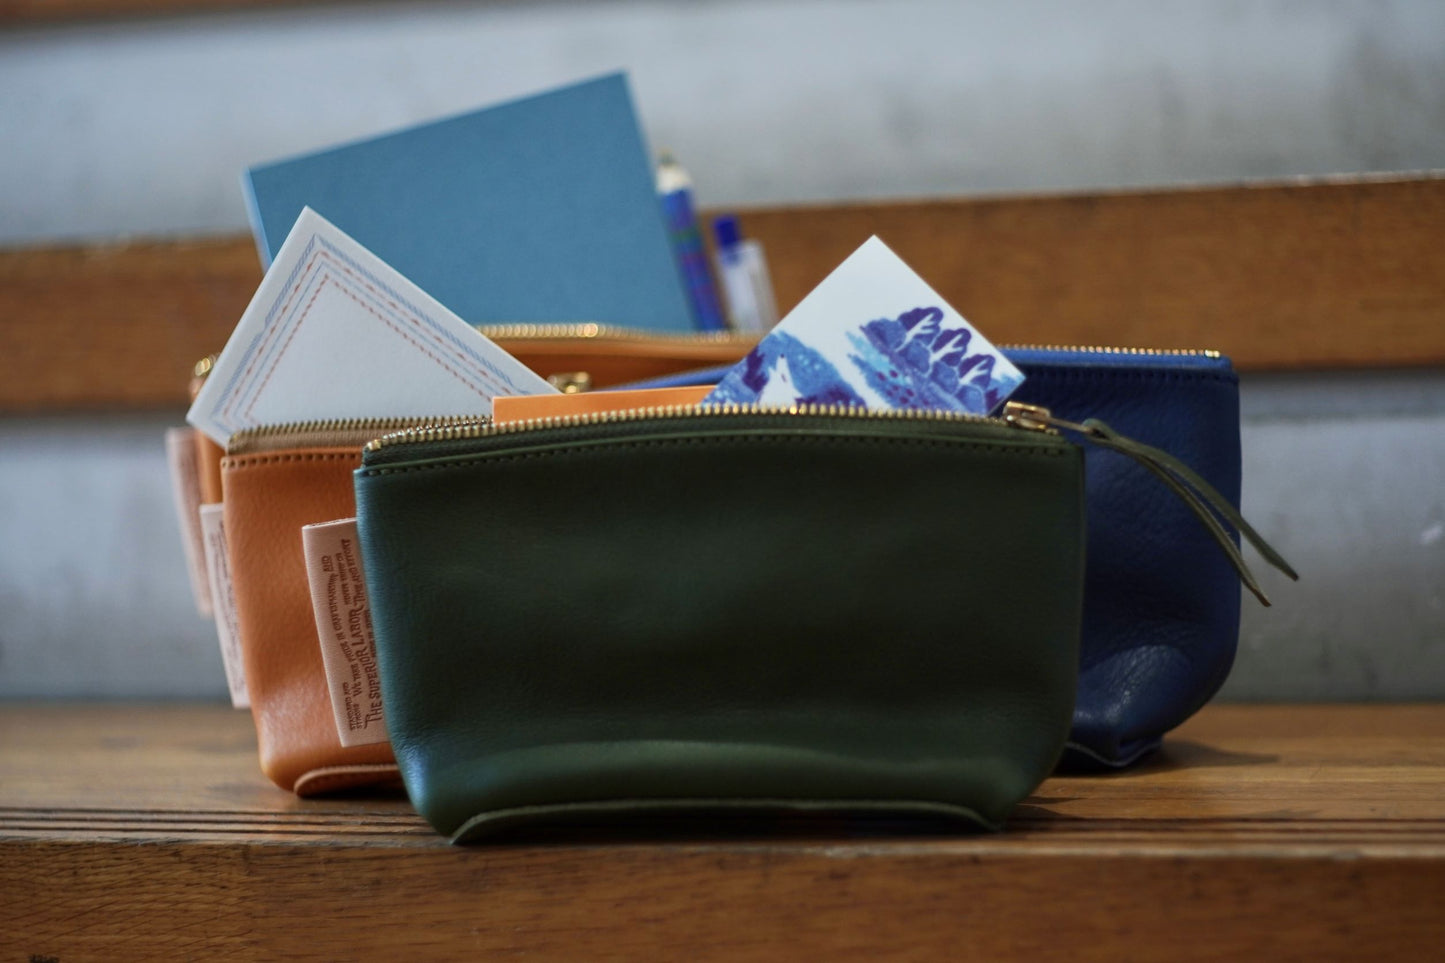 Nume Leather Pouch S